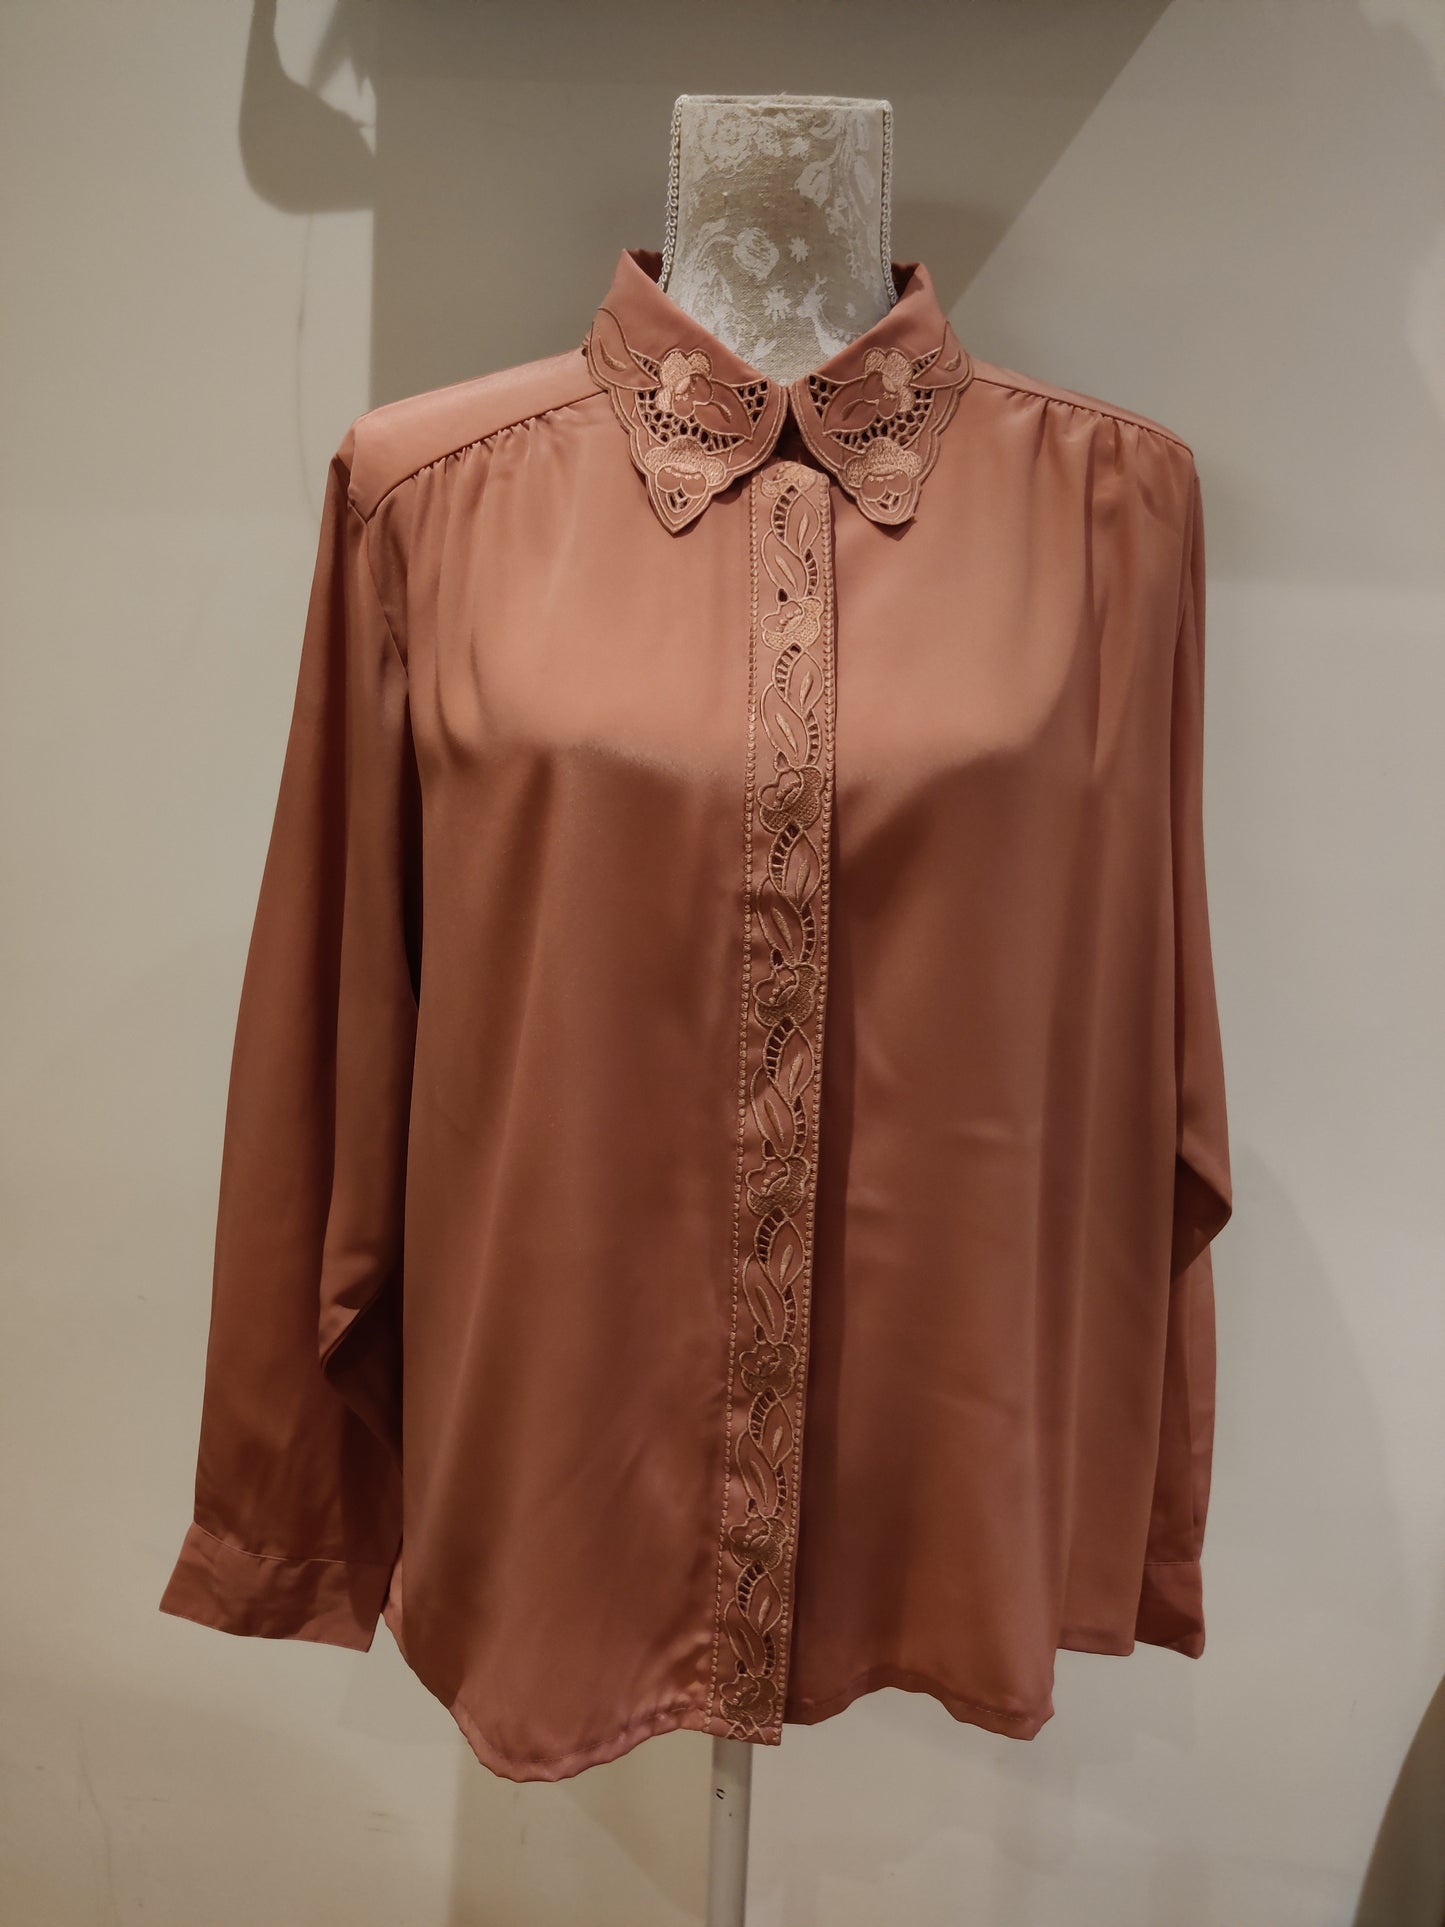 Stunning dusky pink 80s blouse with statement collar. Size 20-22.